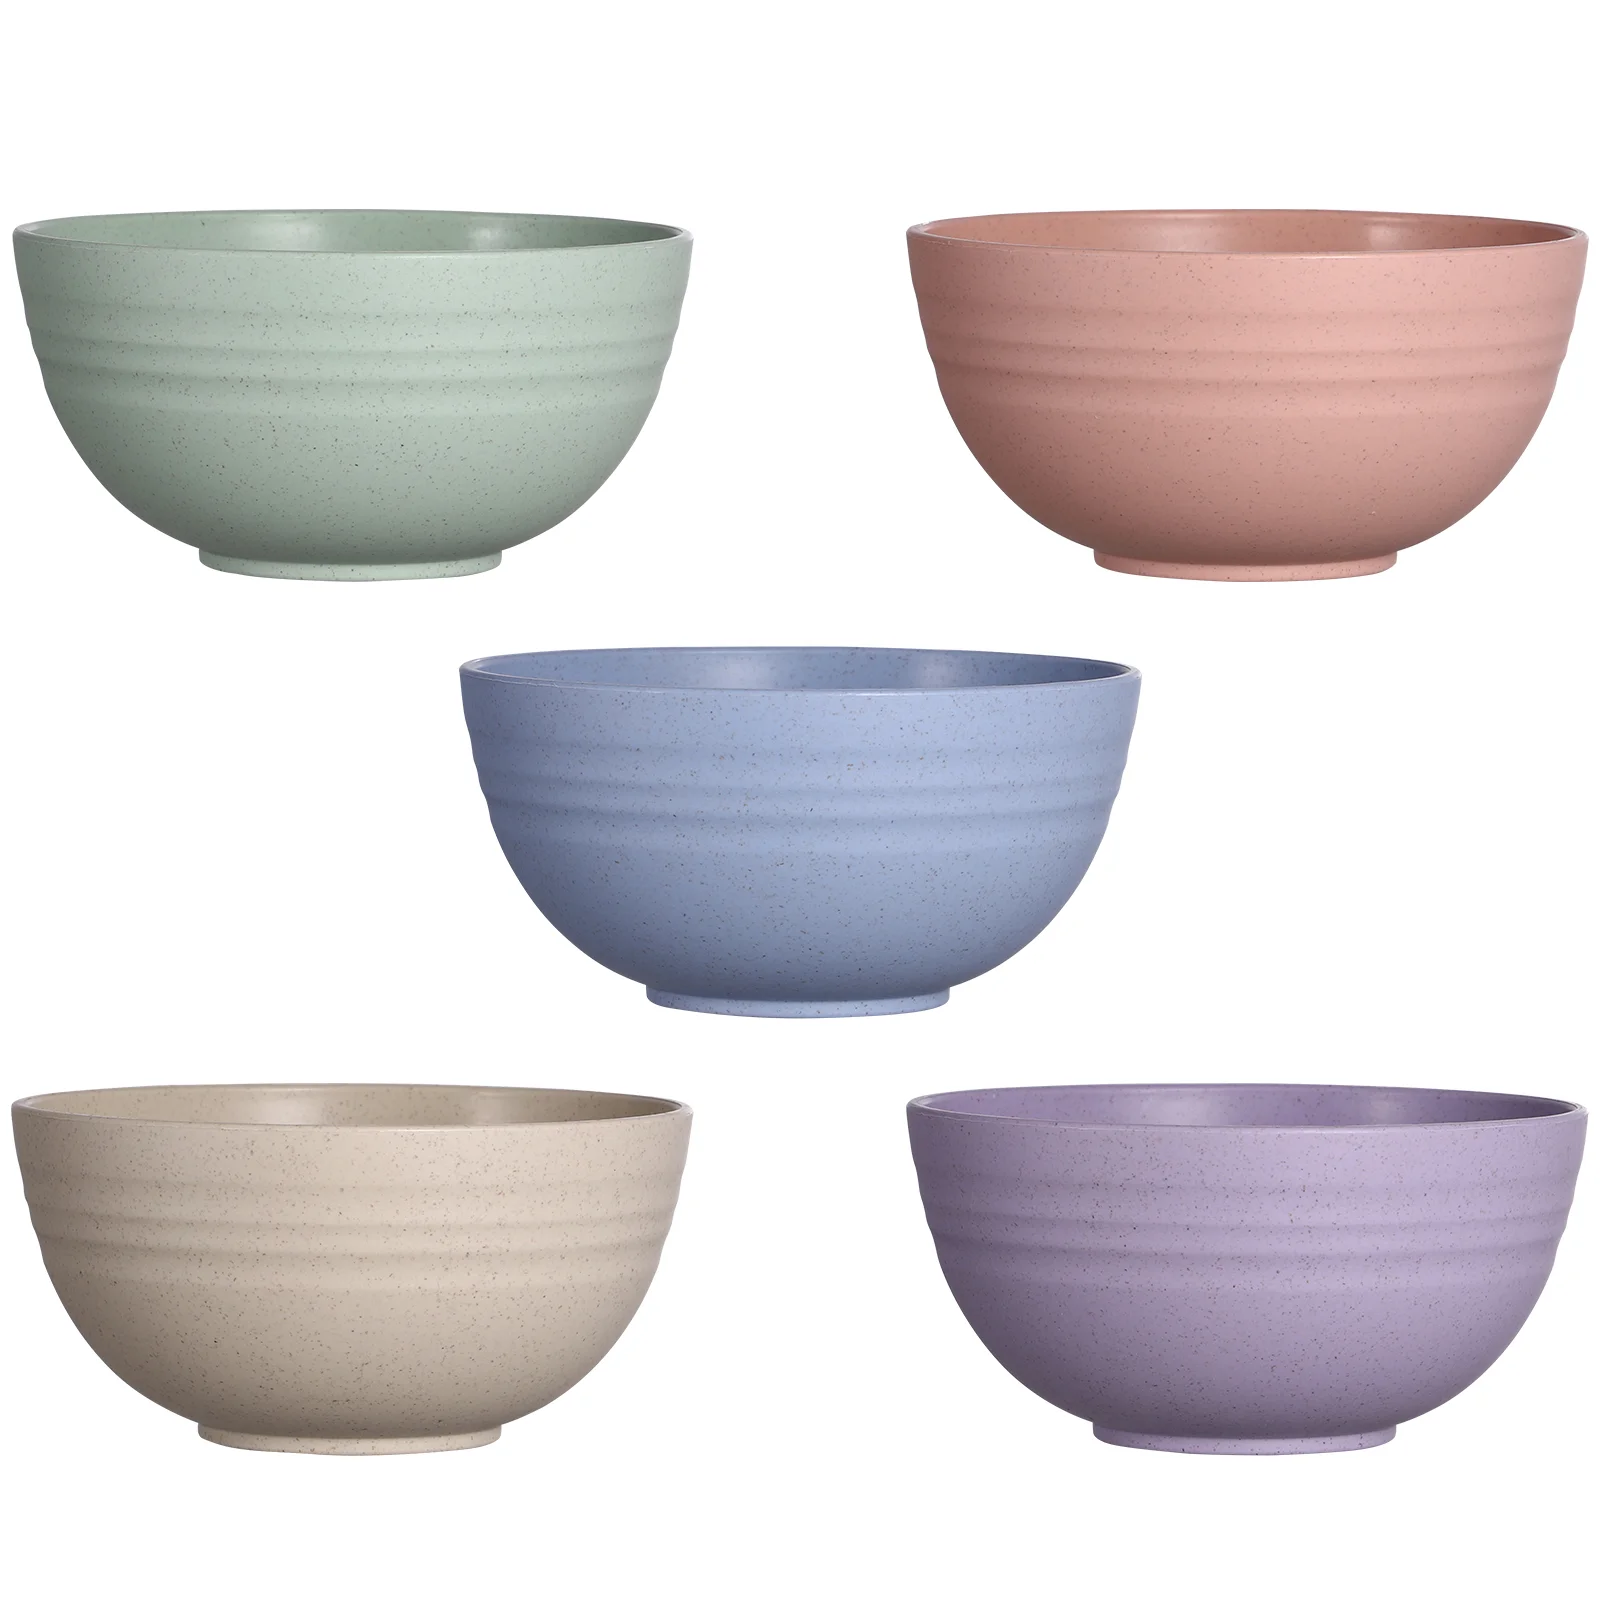 

Bowls Bowl Cereal Straw Wheat Set Salad Unbreakable Mixing Soup Kitchen Snack Microwave Degradable Sets Safe Dinner Dish Plates